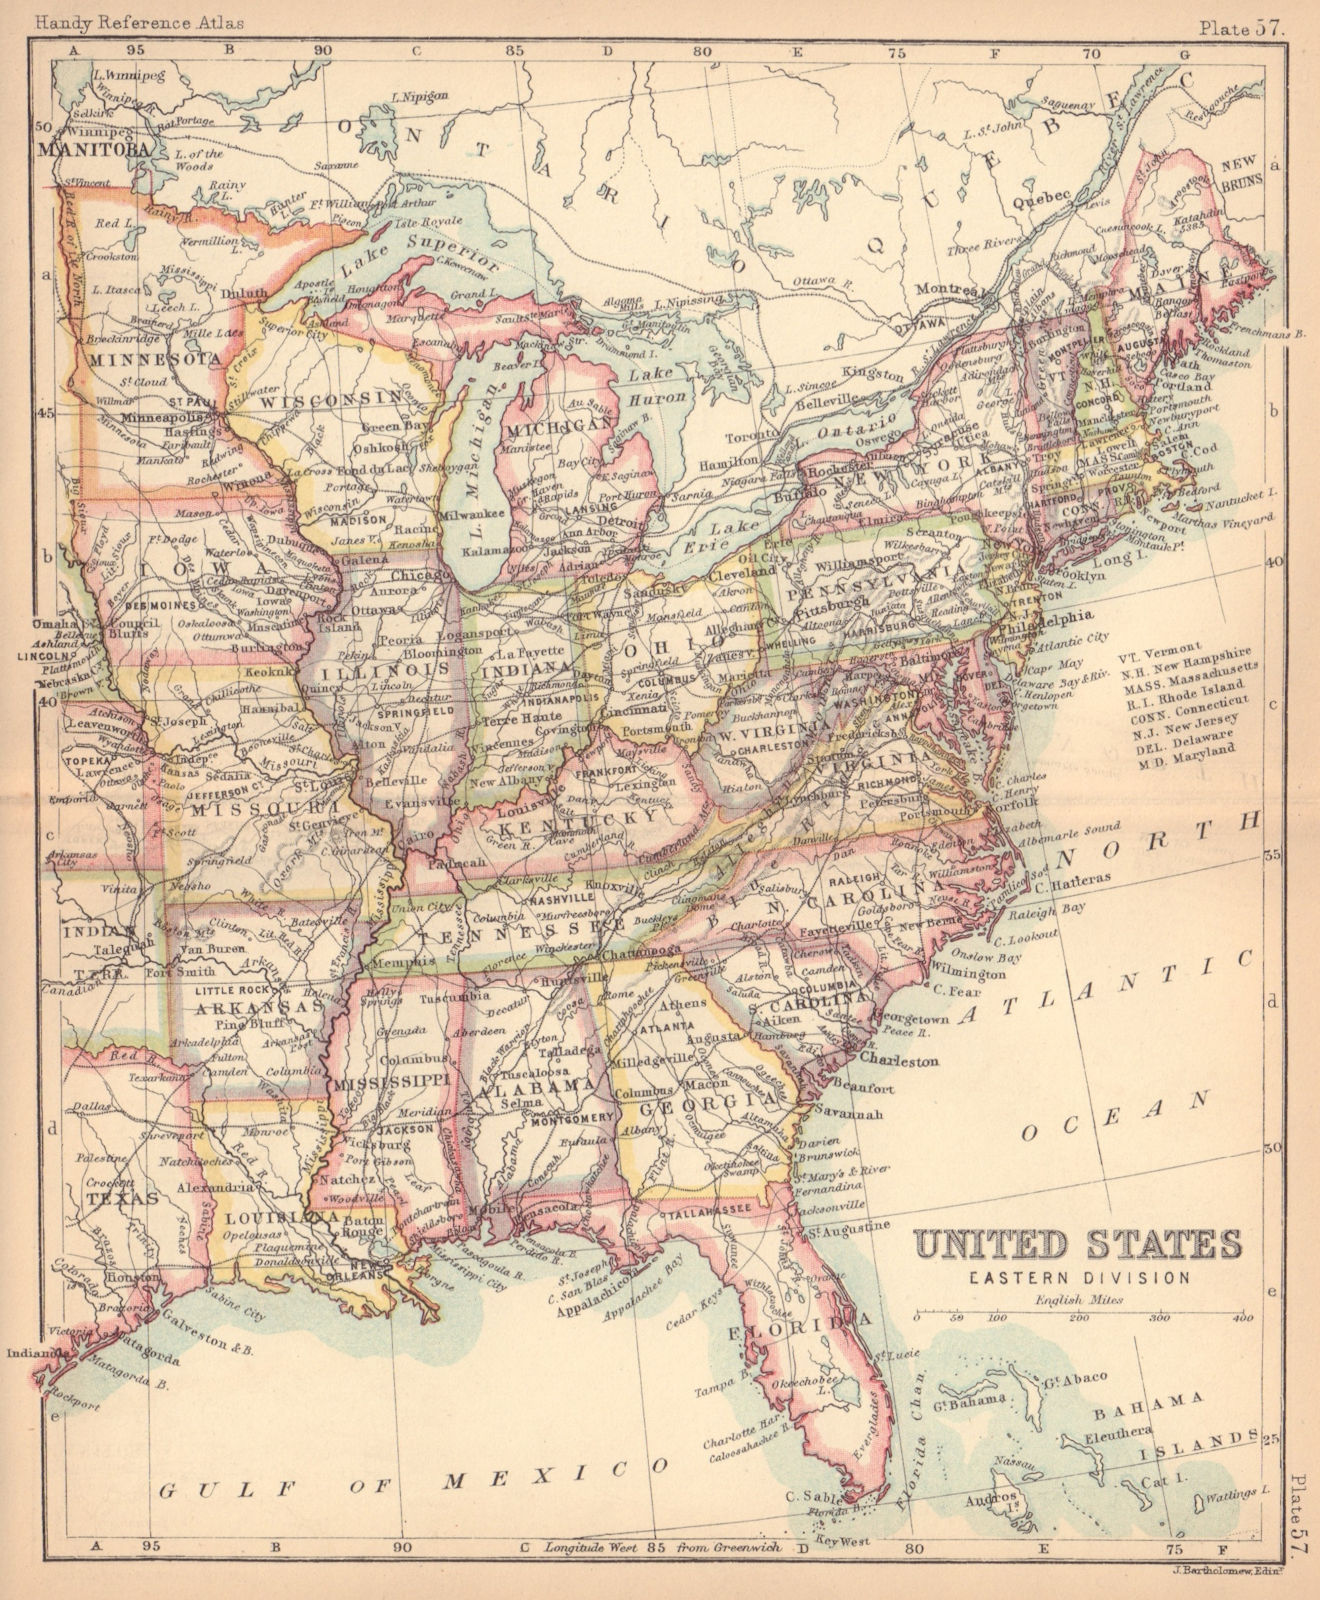 Associate Product United States Eastern Division. USA. BARTHOLOMEW 1888 old antique map chart